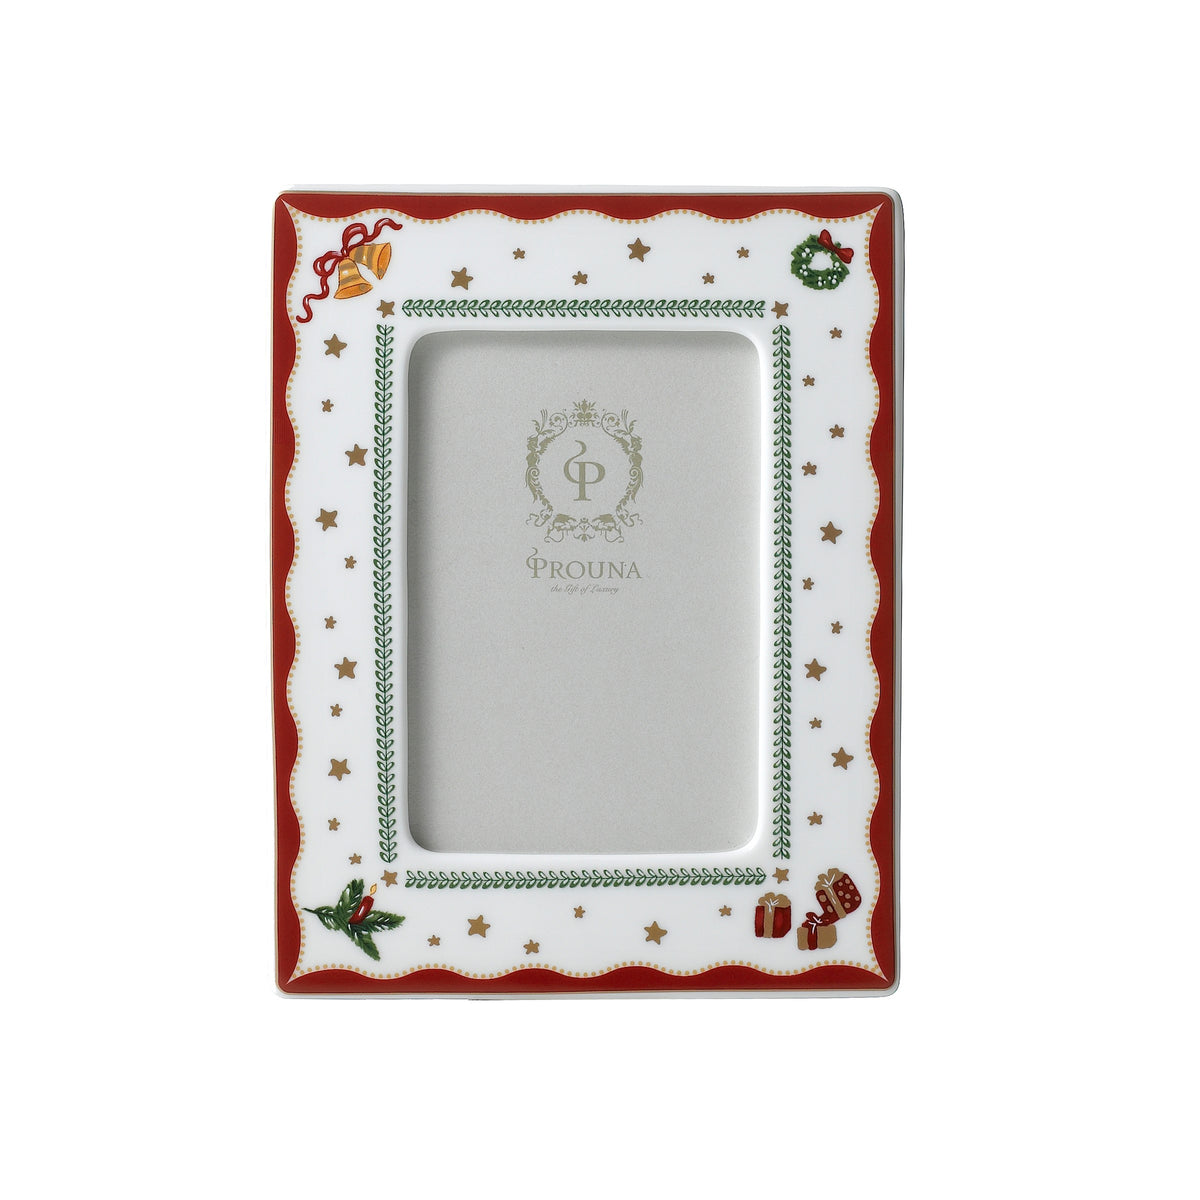 My Noel Picture Frame White Background Photo